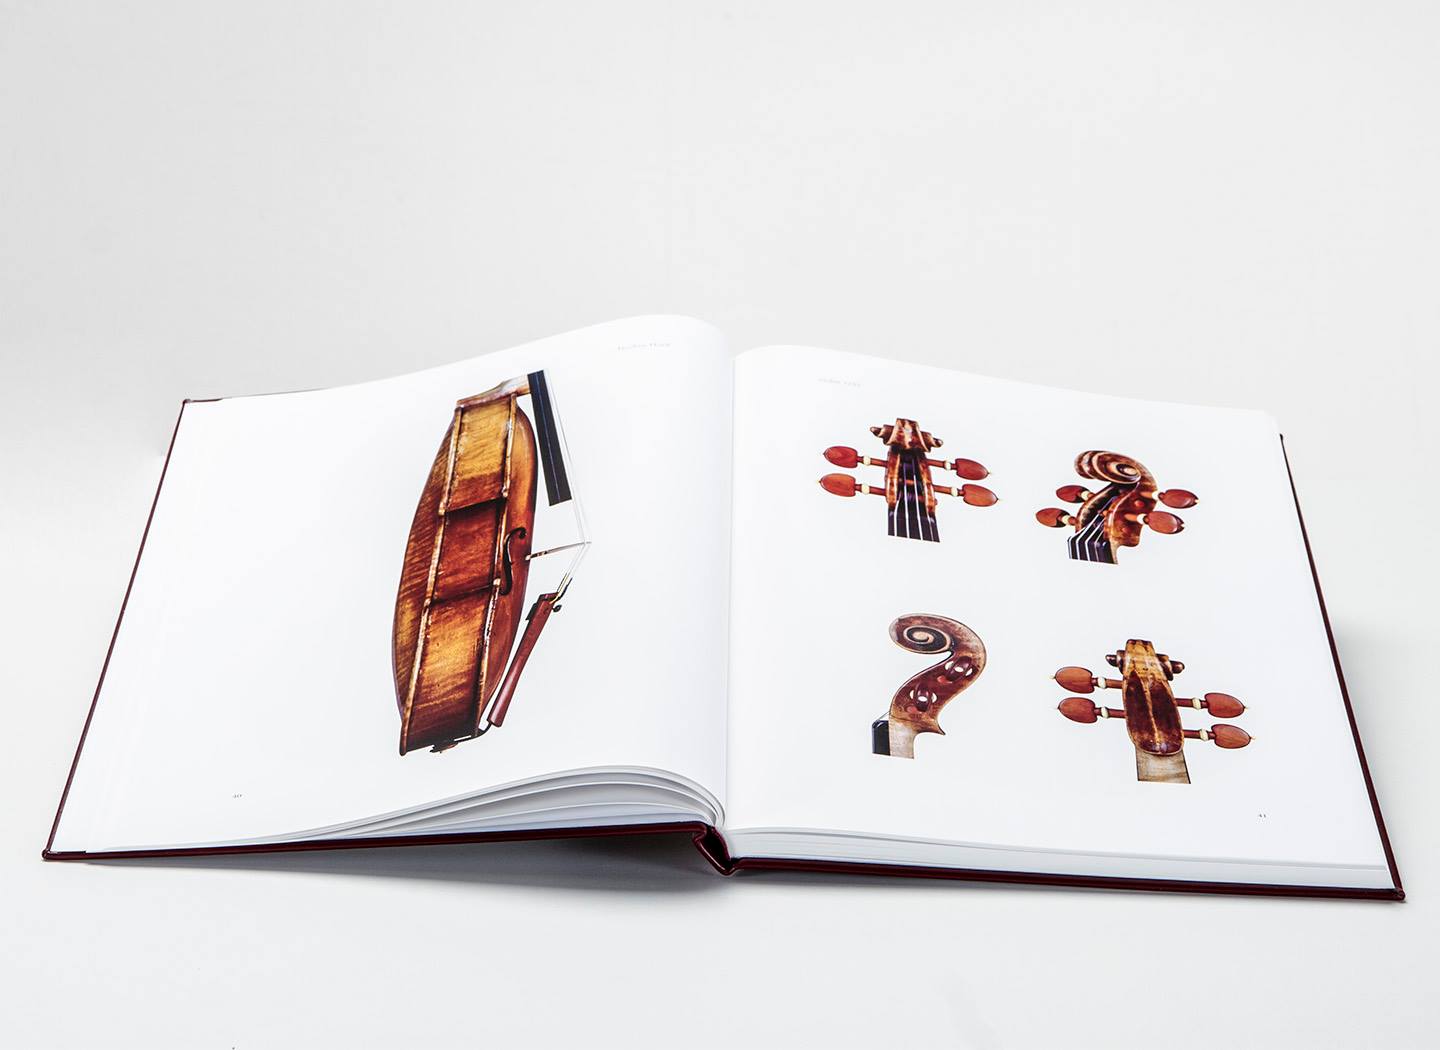 Italian & French Violin Makers - Library Edition